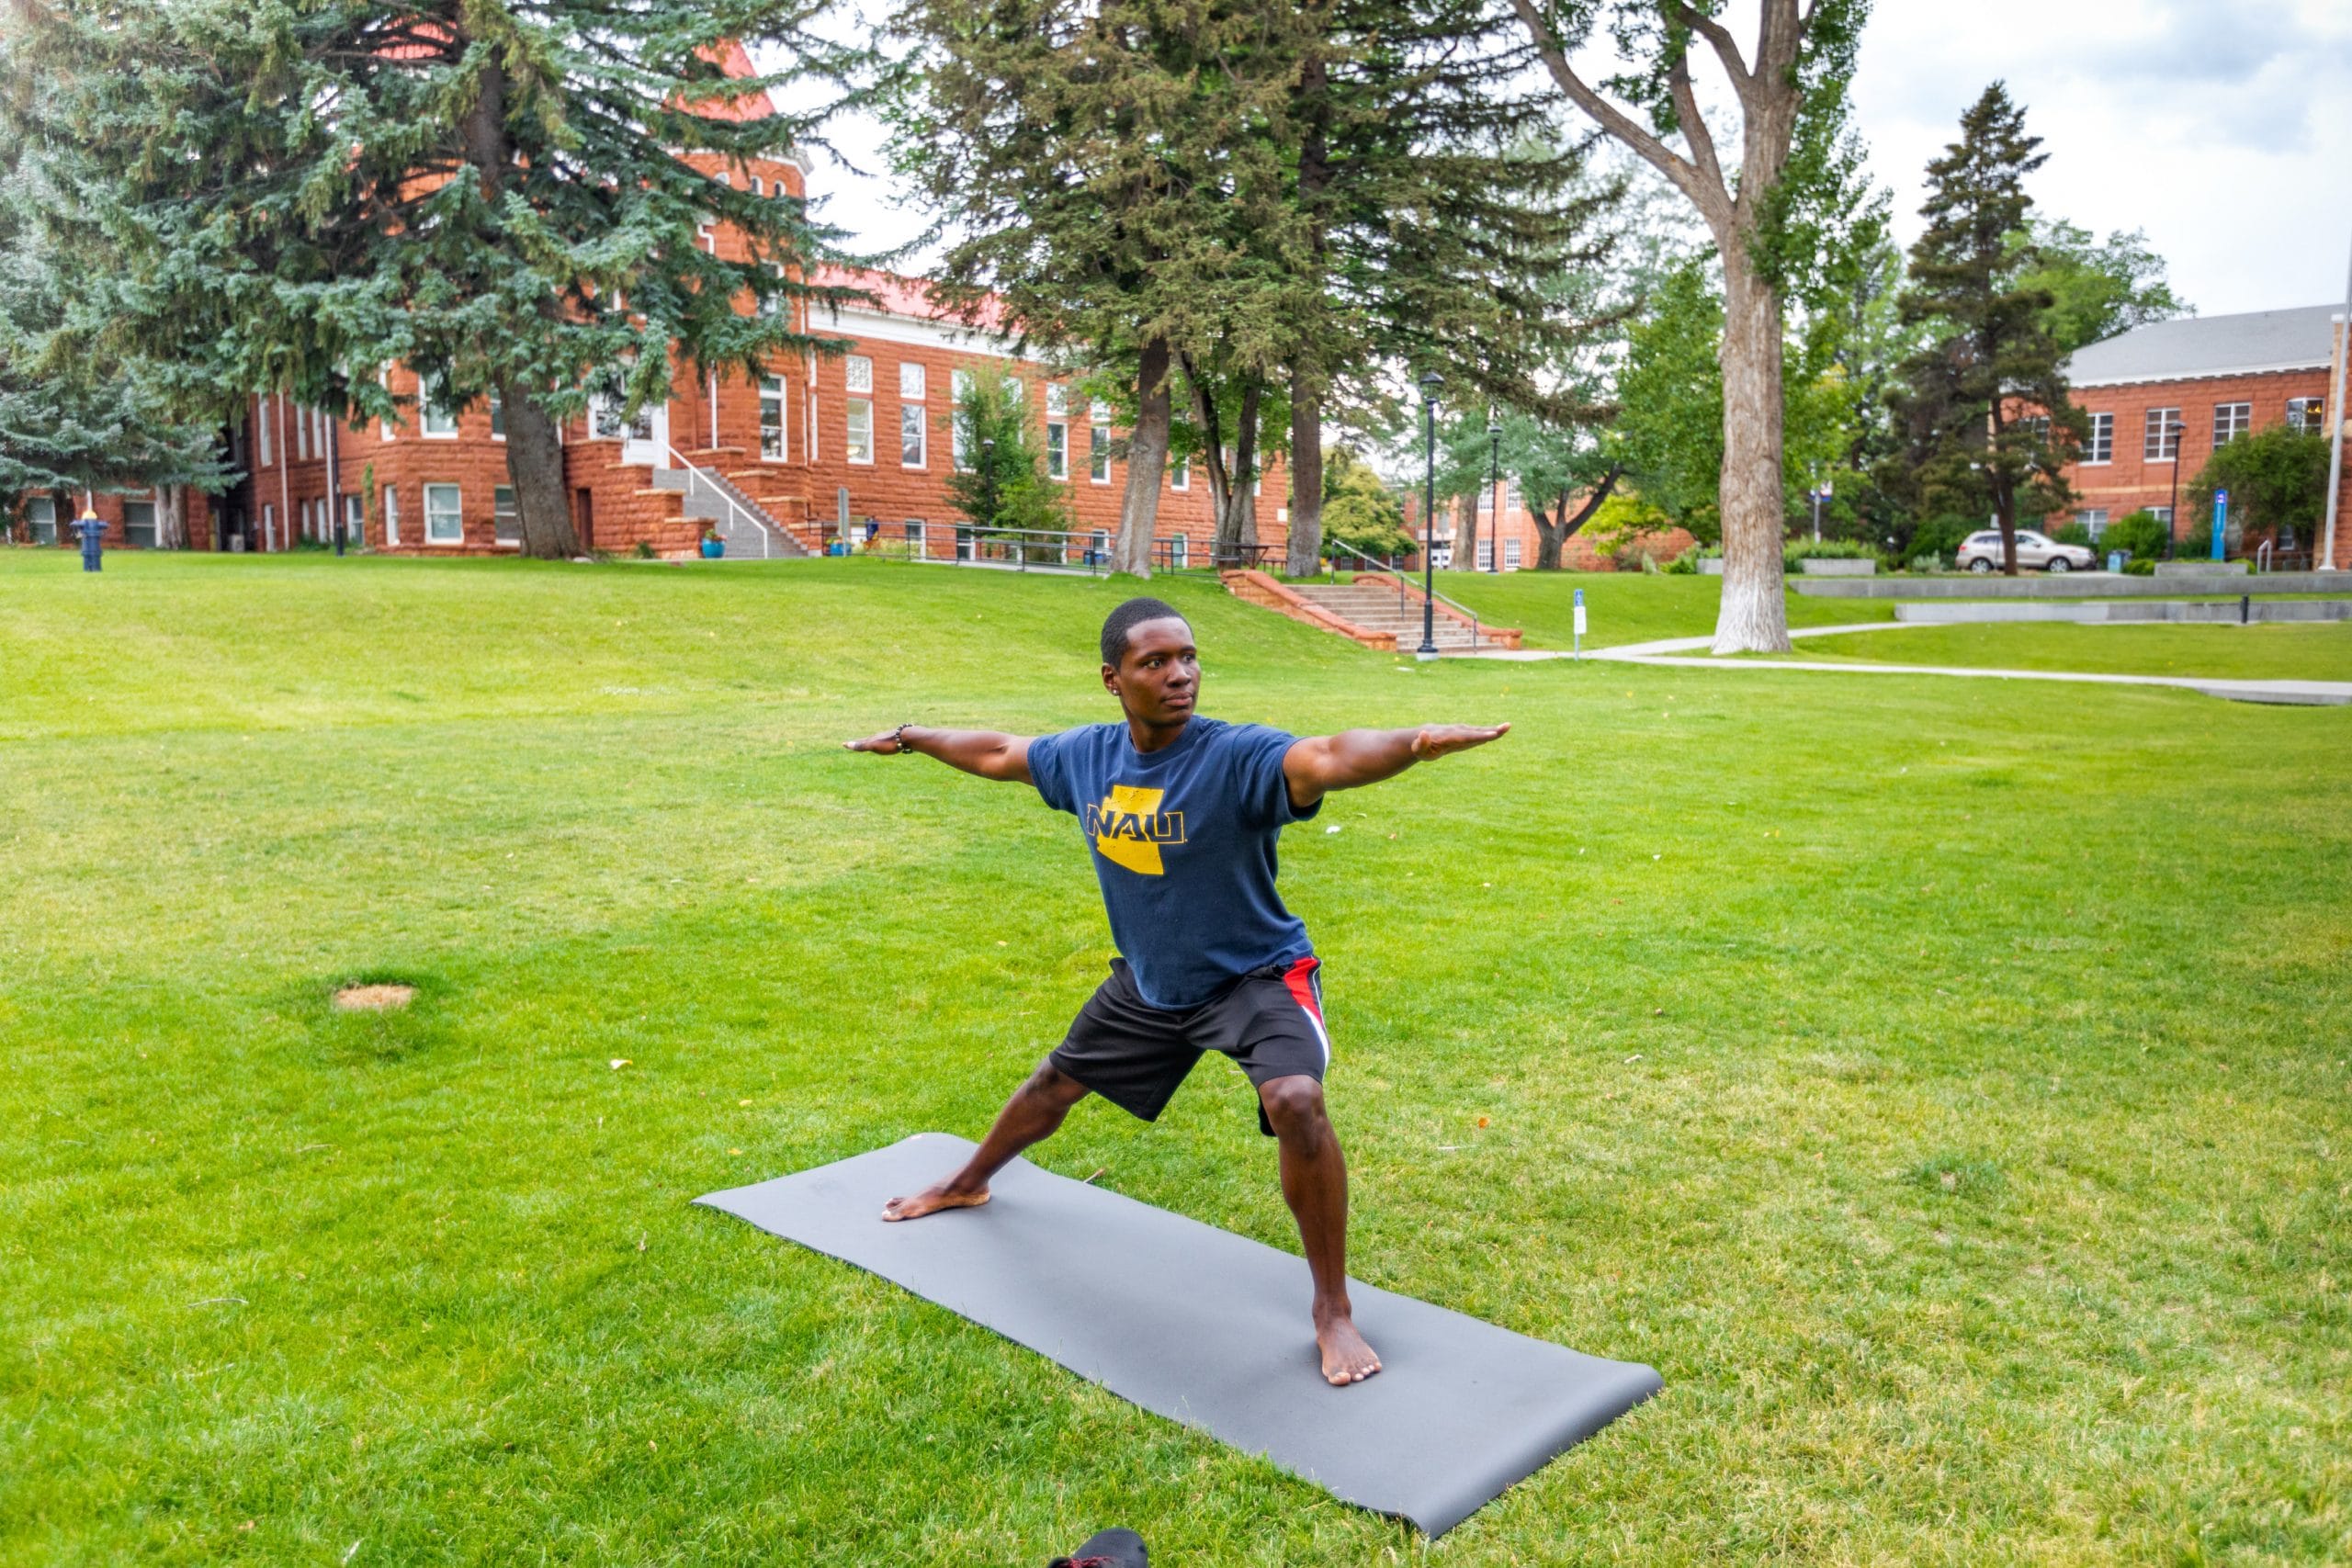 Student does yoga in grass outside.